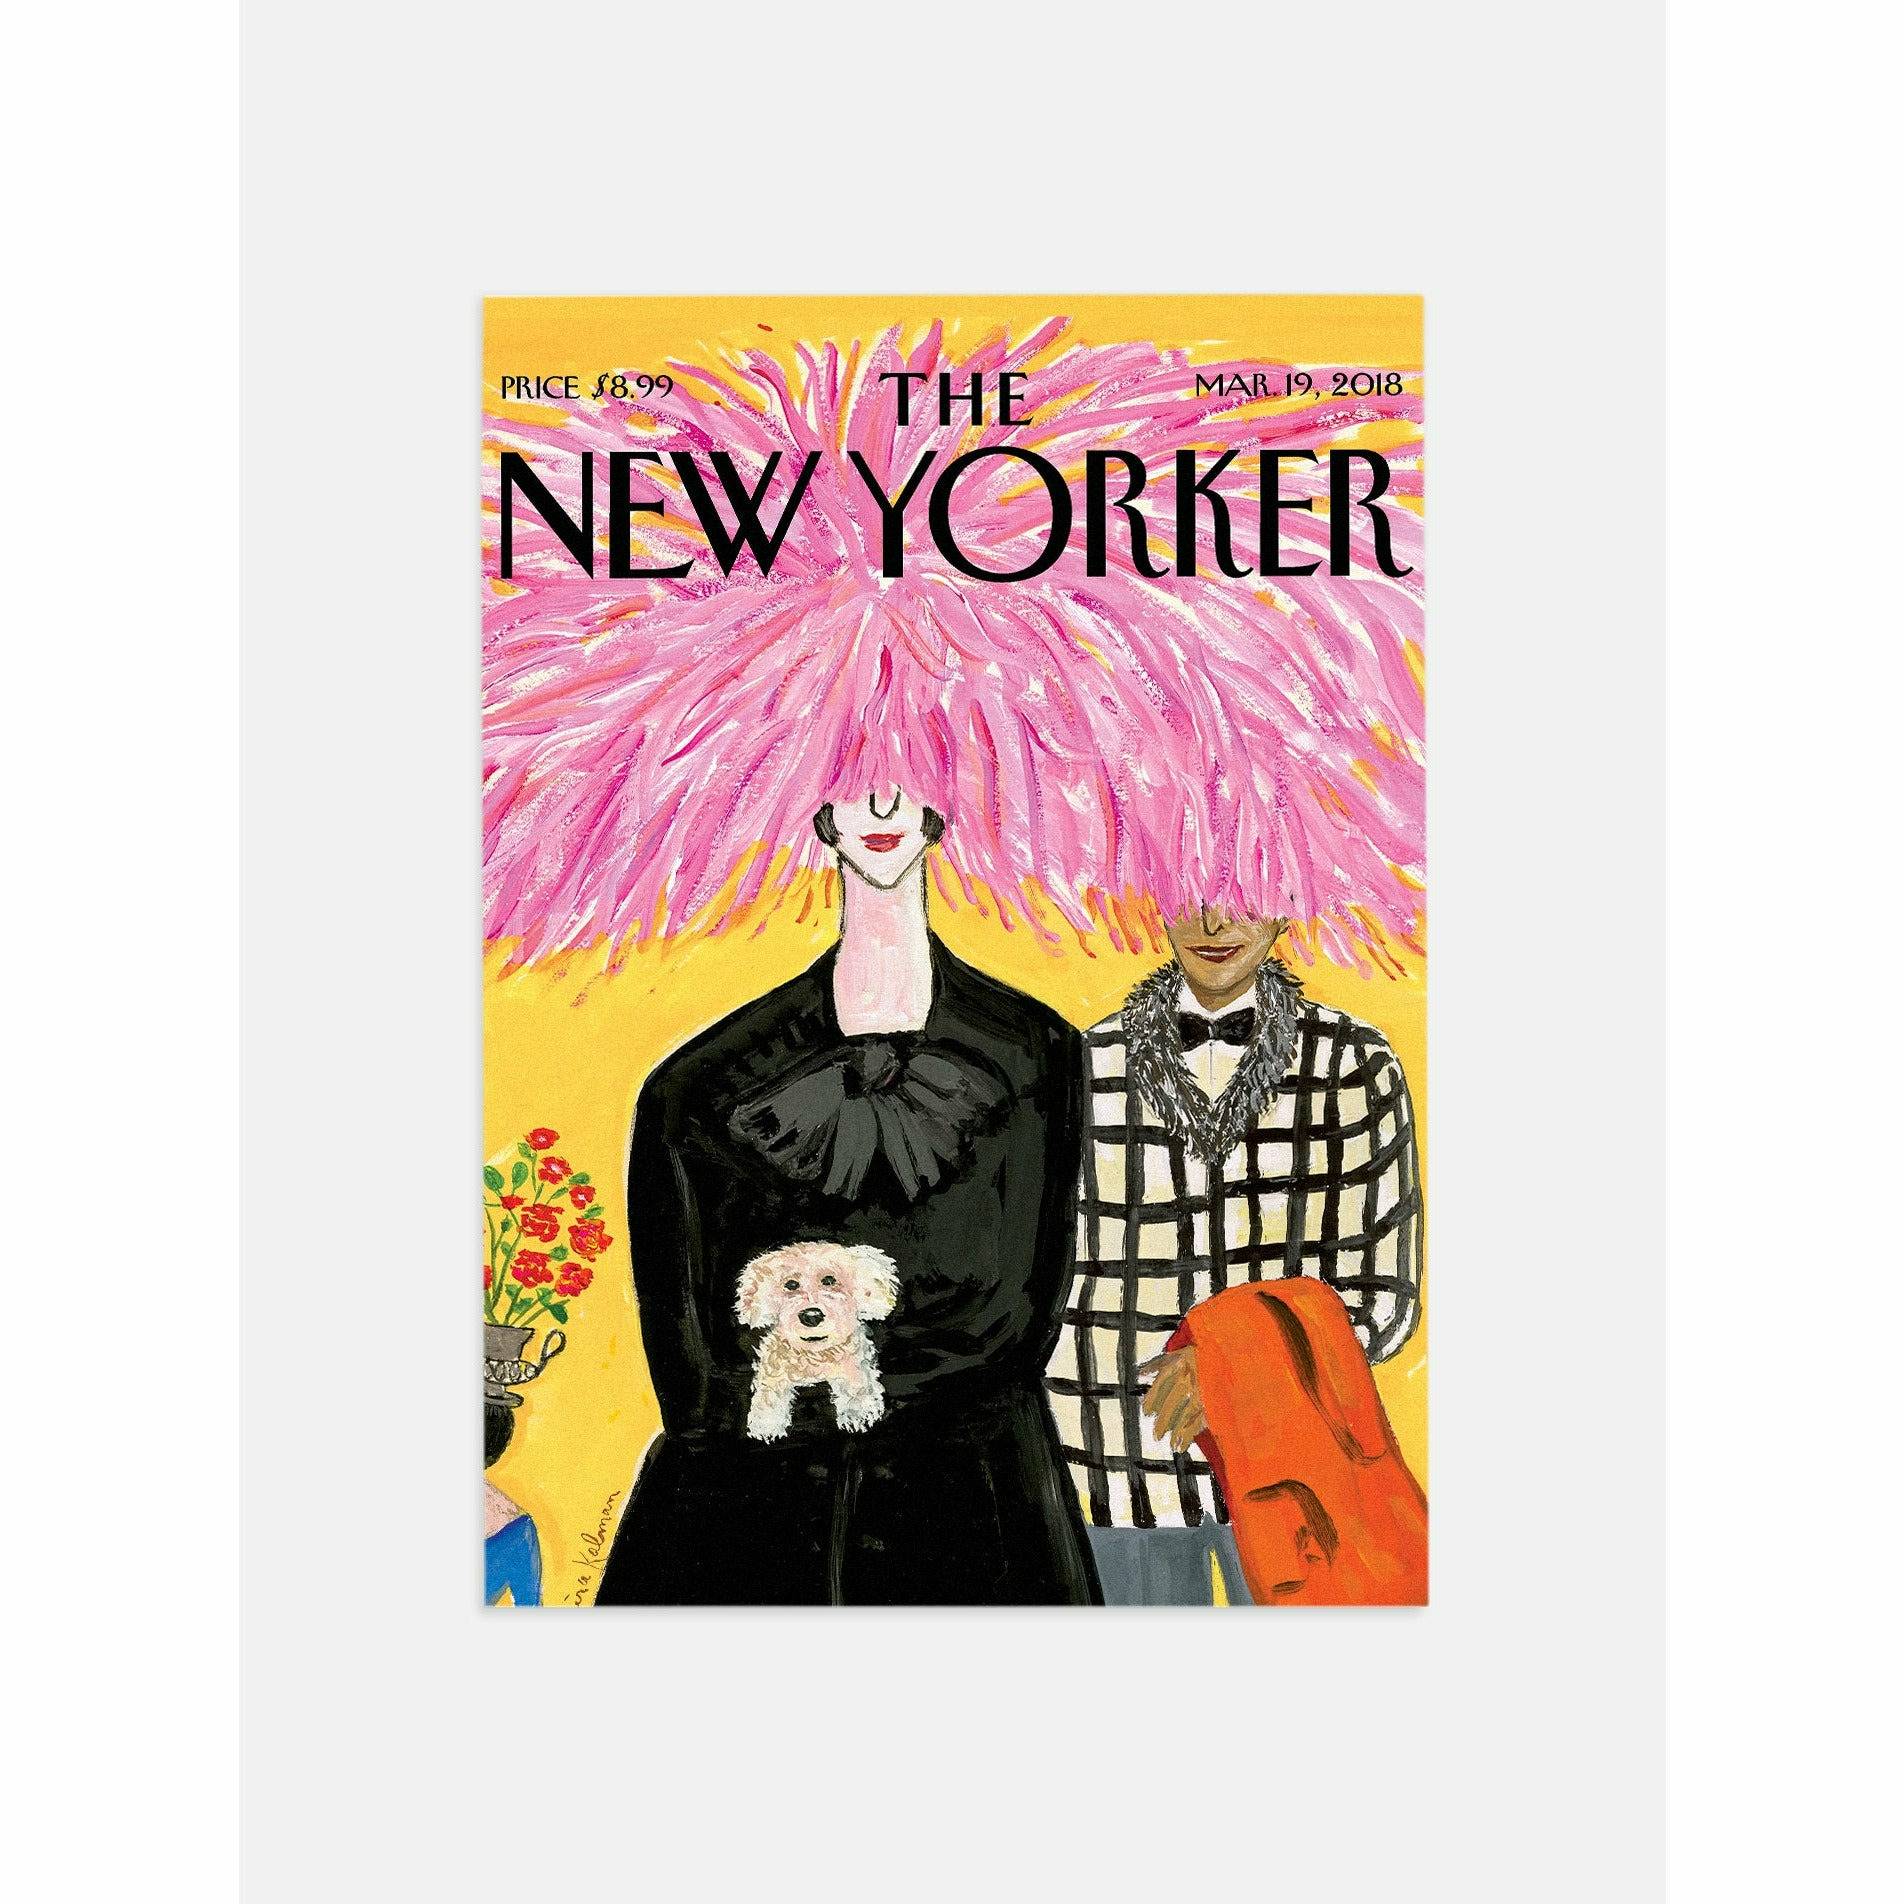 The New Yorker Mar 19, 2018